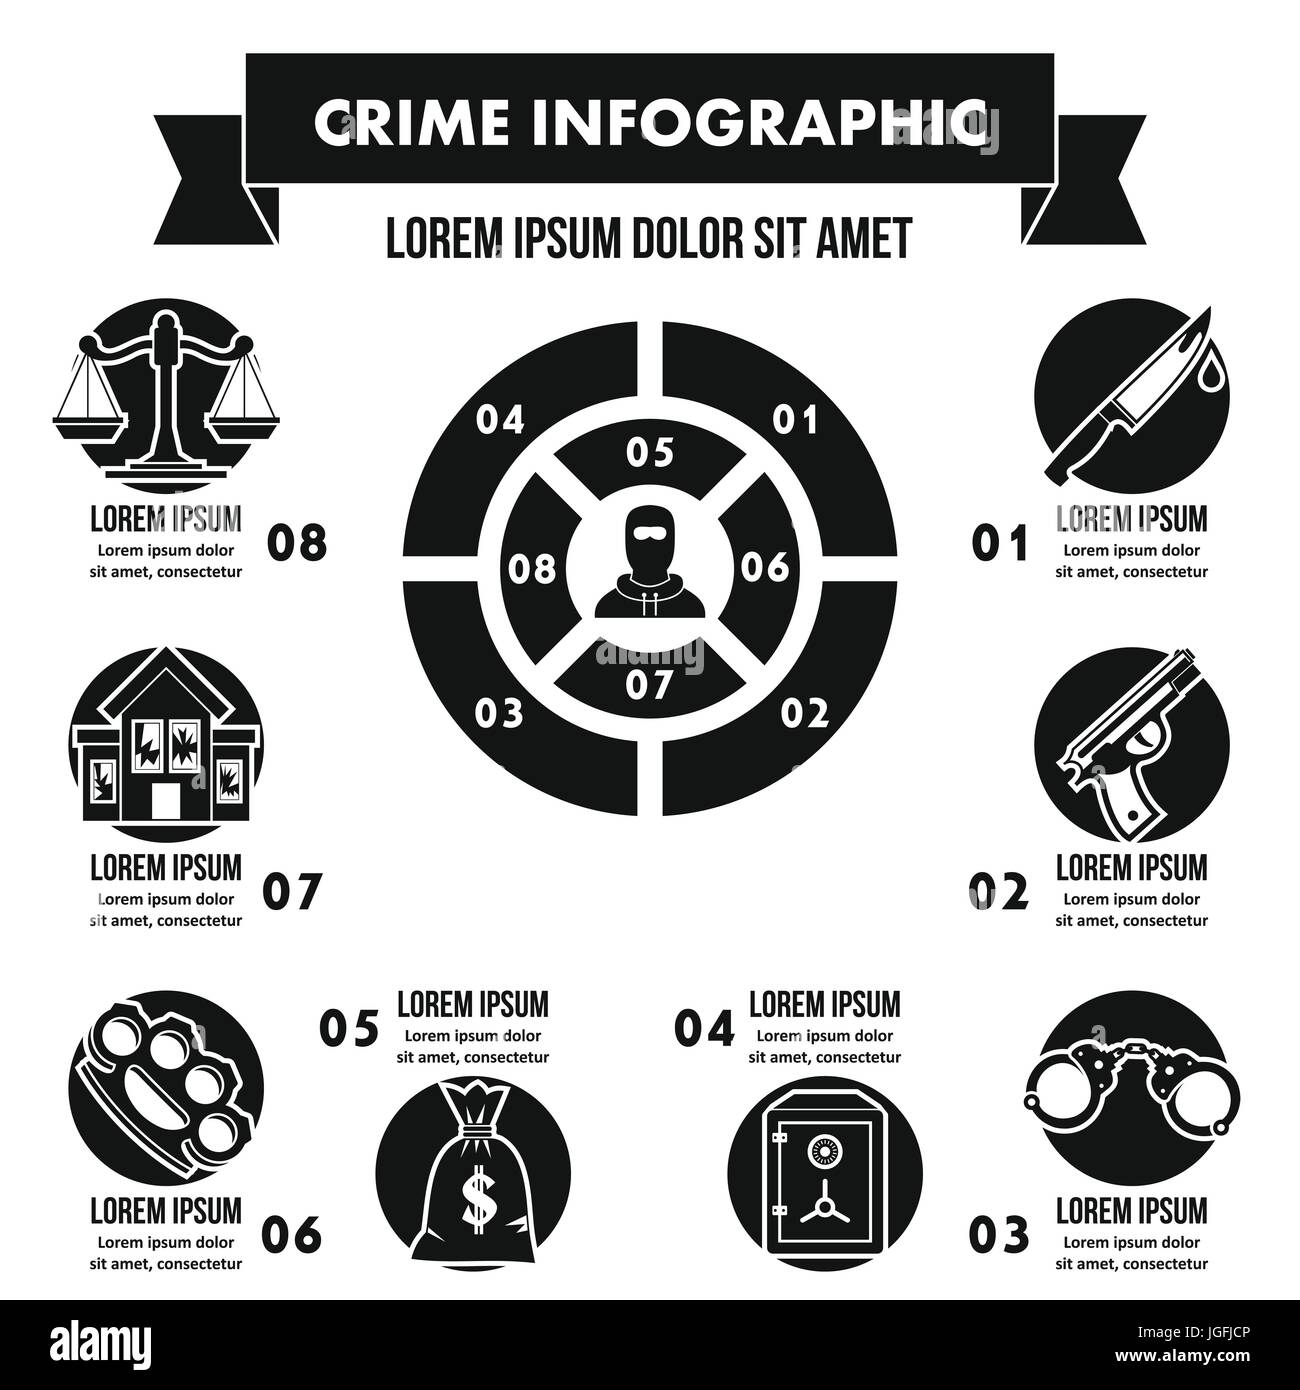 Crime infographic concept, simple style Stock Vector